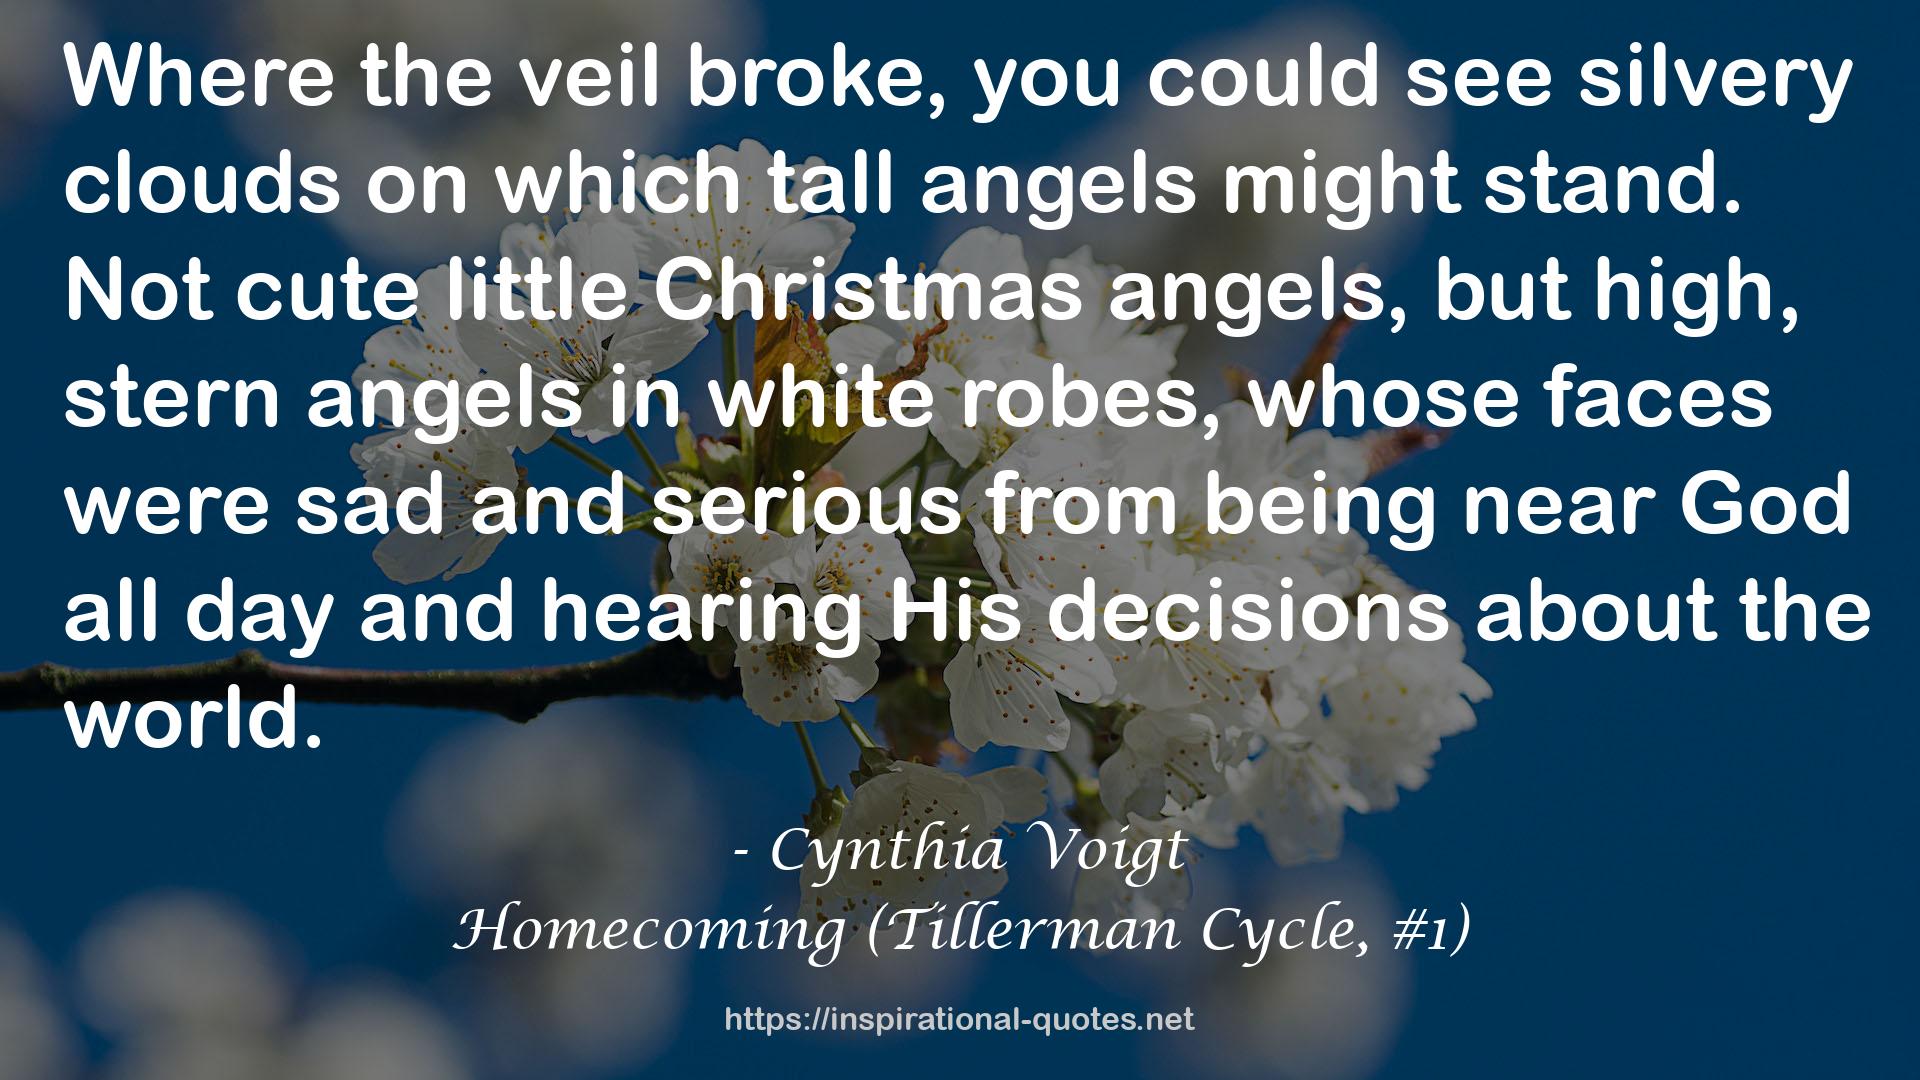 Homecoming (Tillerman Cycle, #1) QUOTES